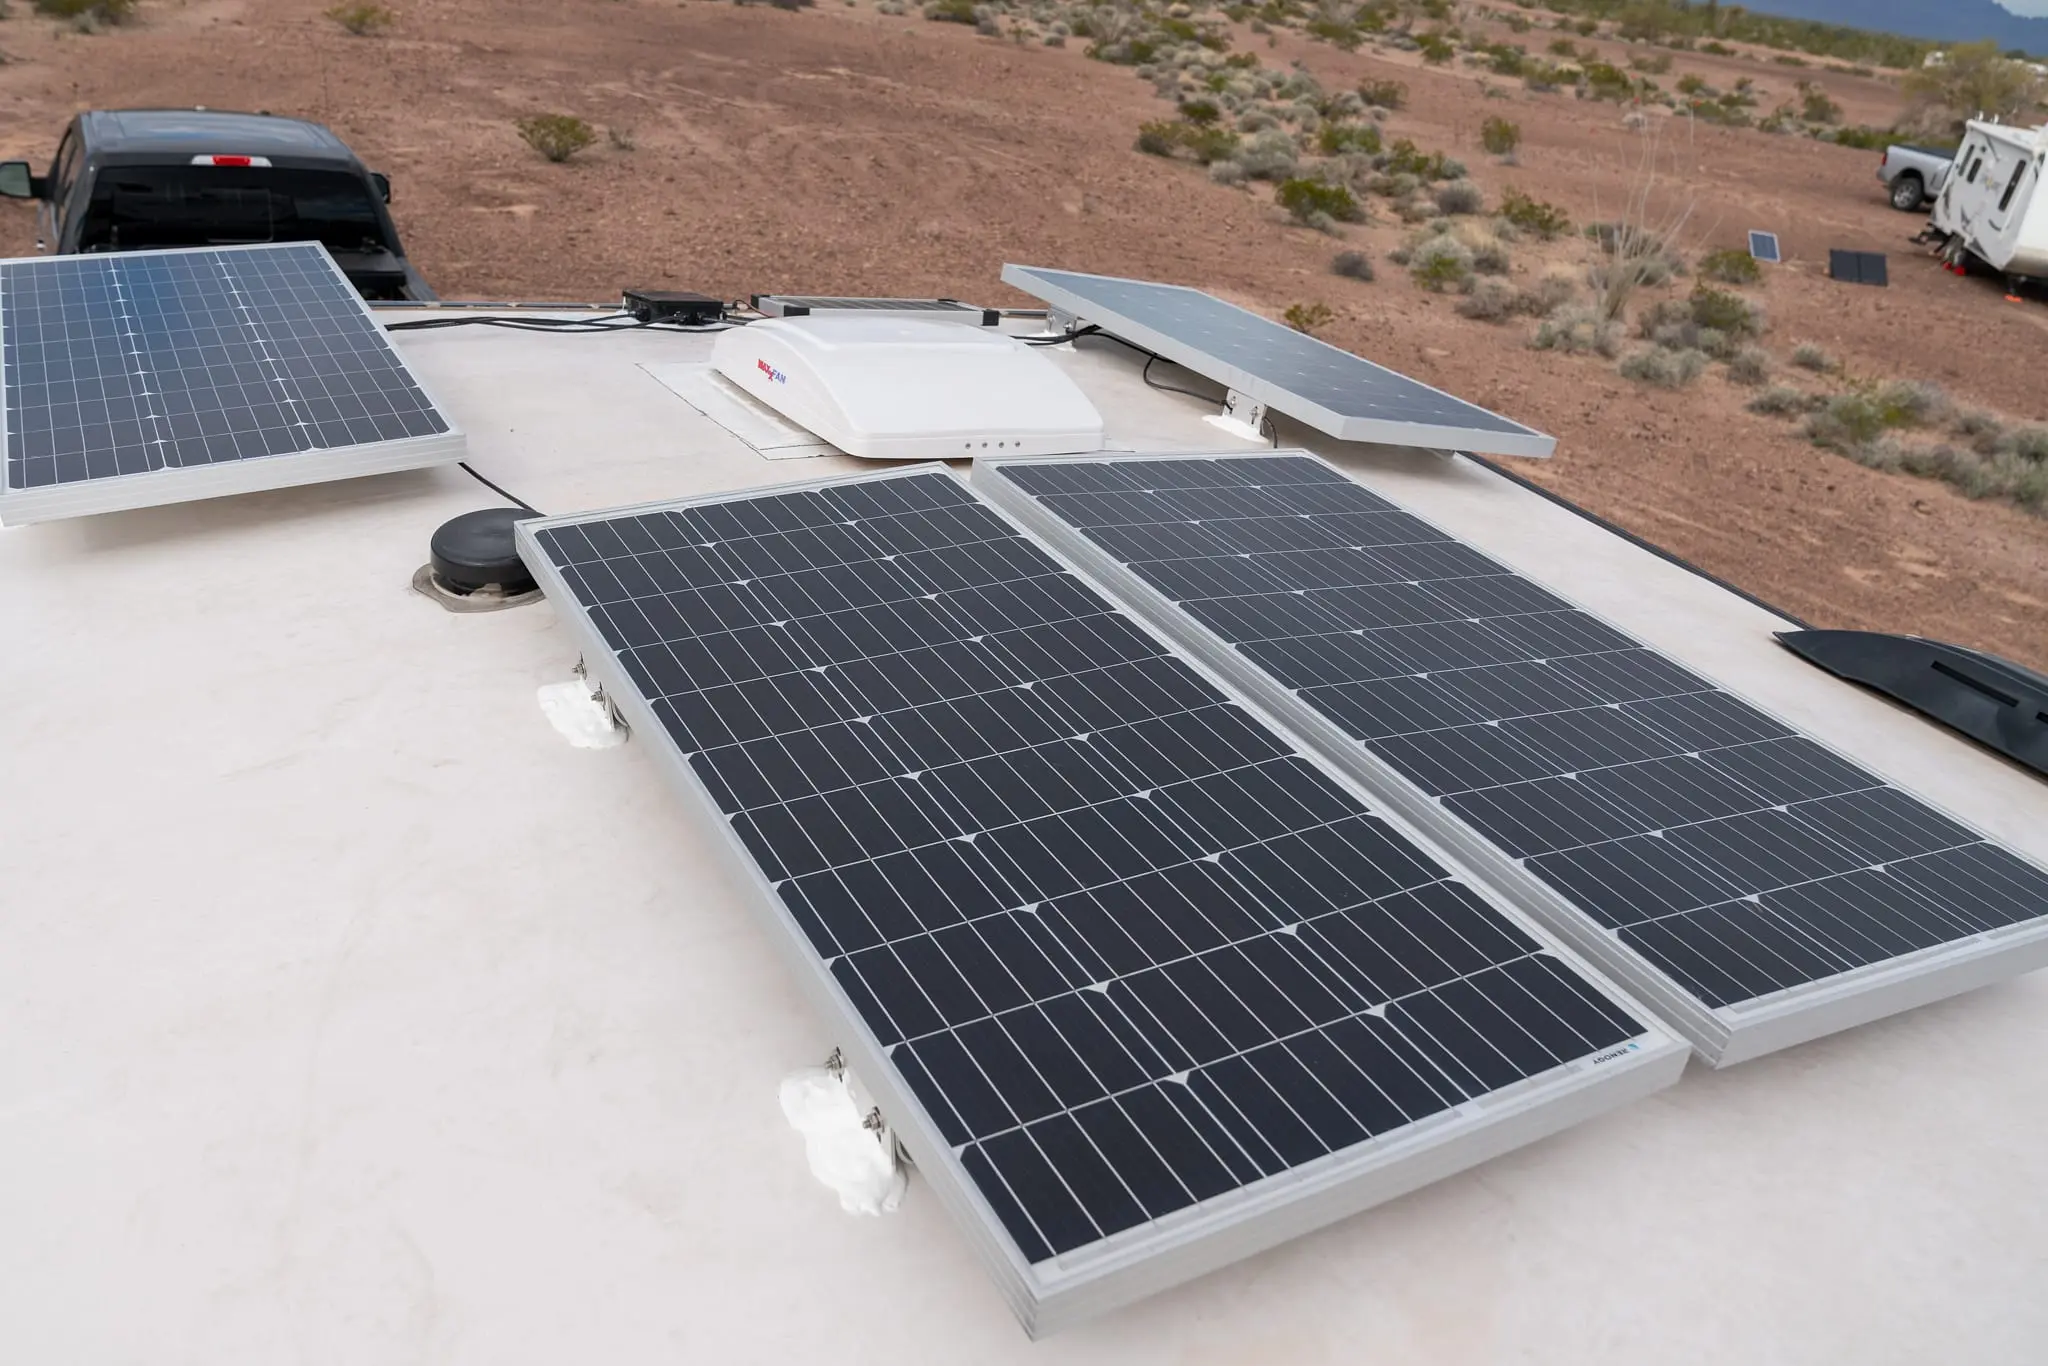 mounting solar panels on rv roof - How do you install solar panels on a rubber roof